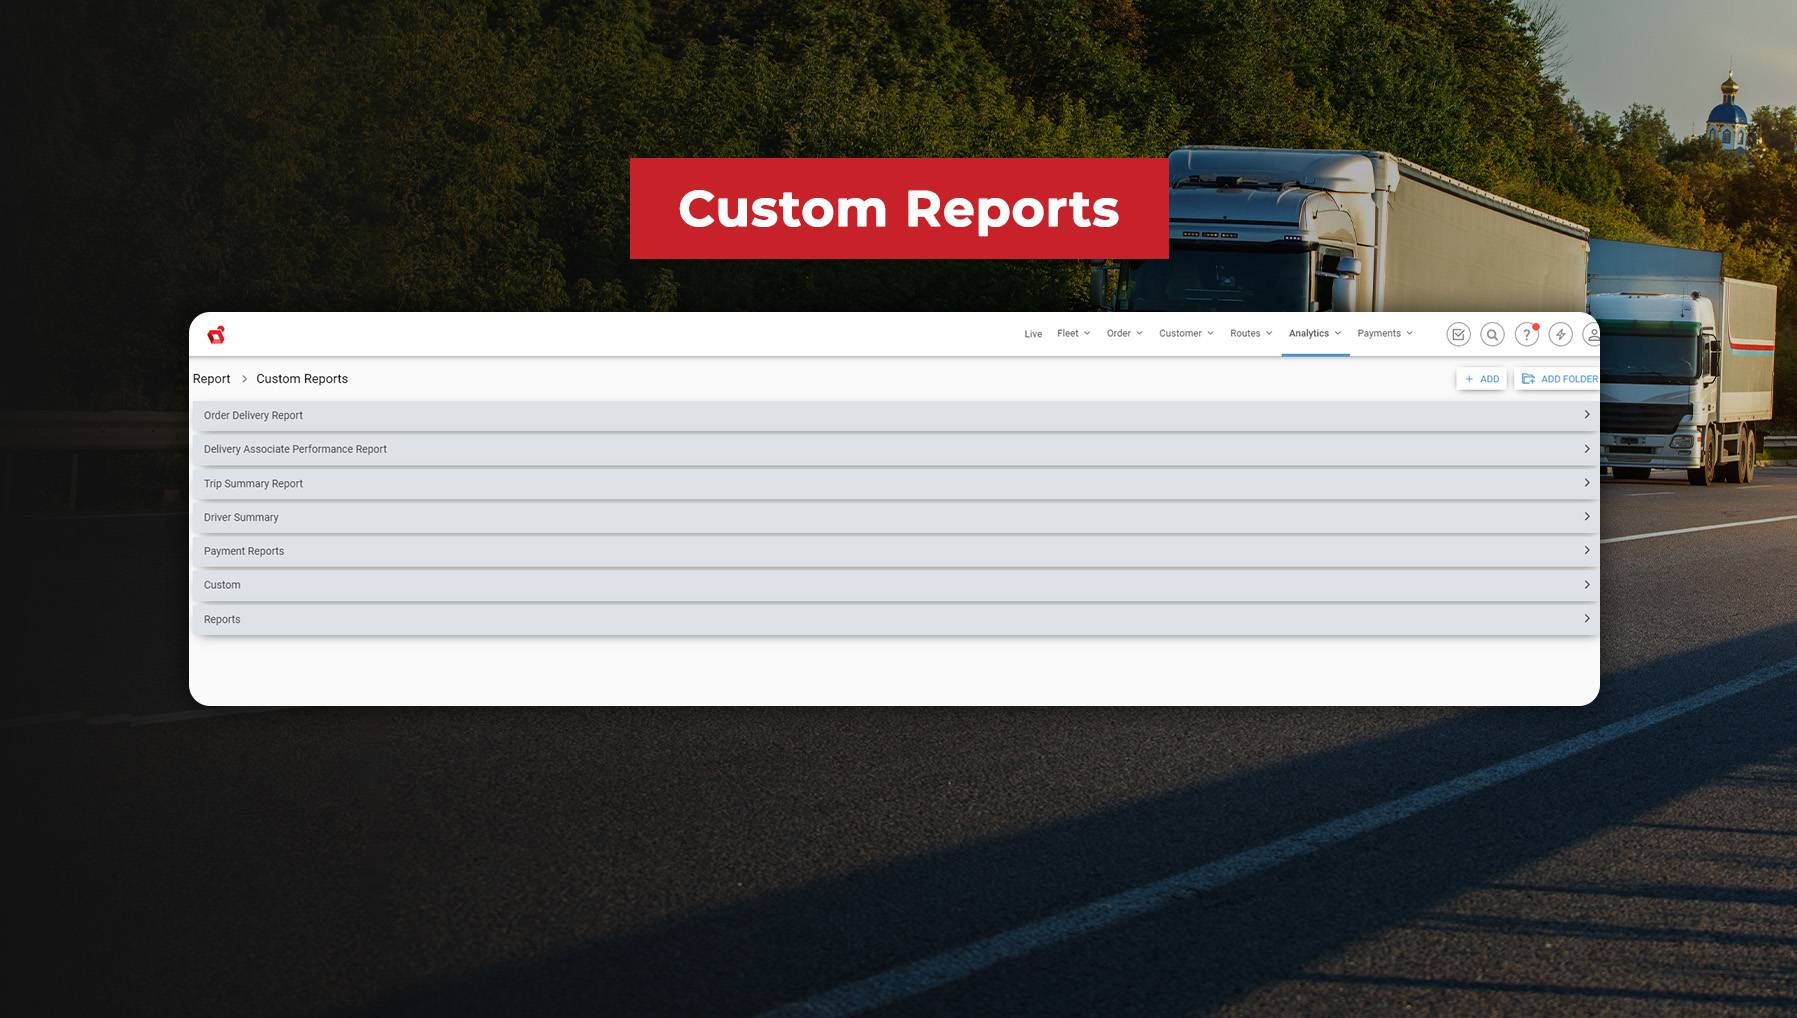 Different Custom Reports Offered by LogiNext